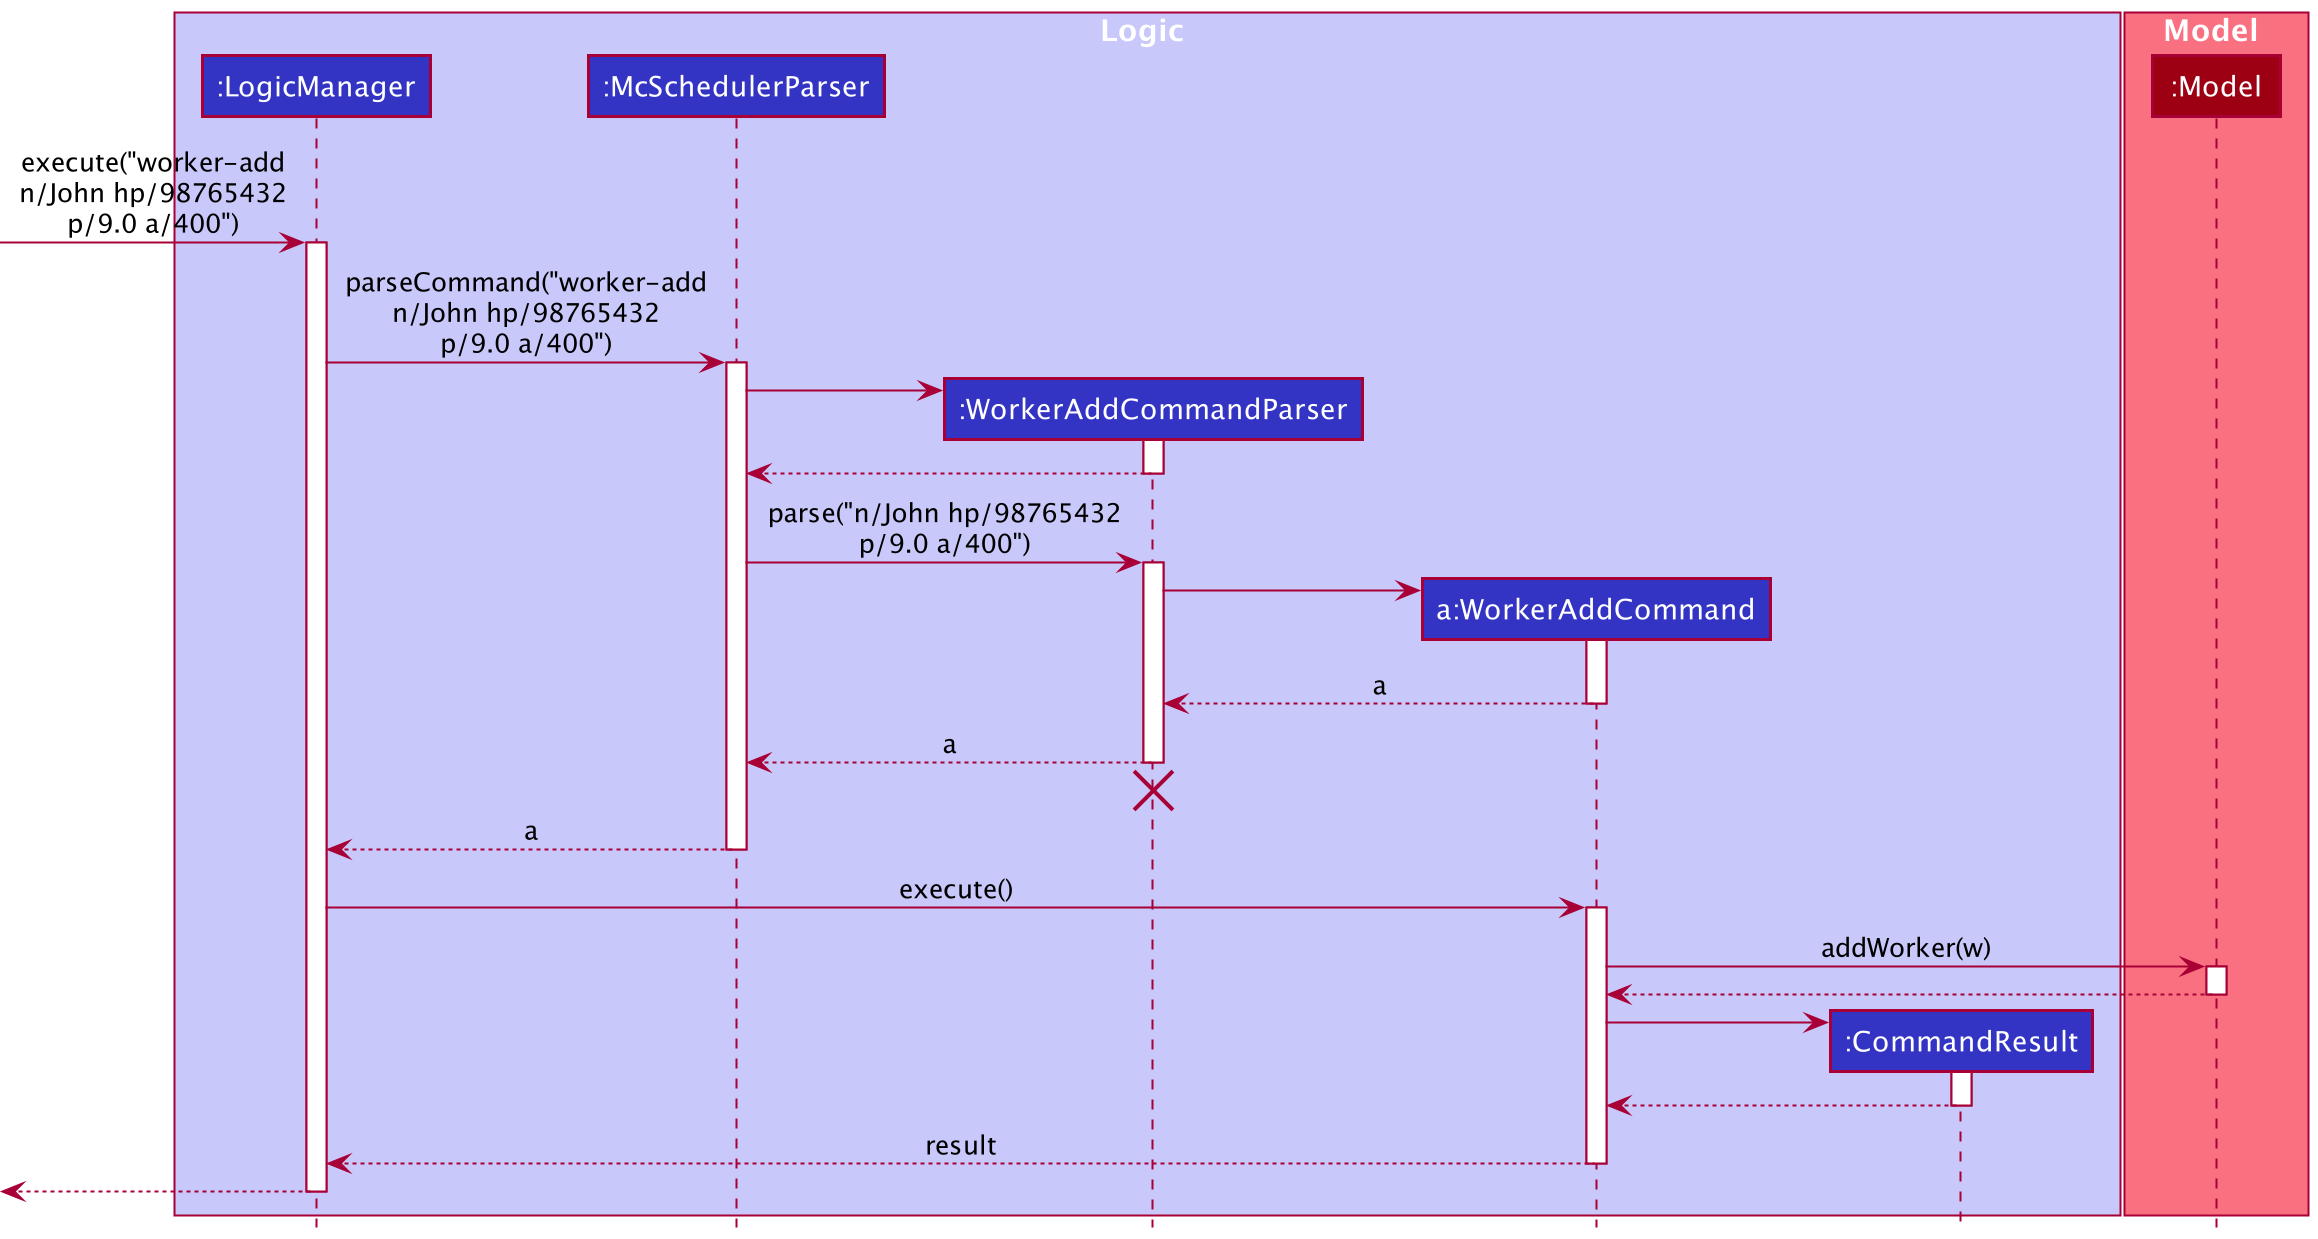 Add Worker Sequence Diagram